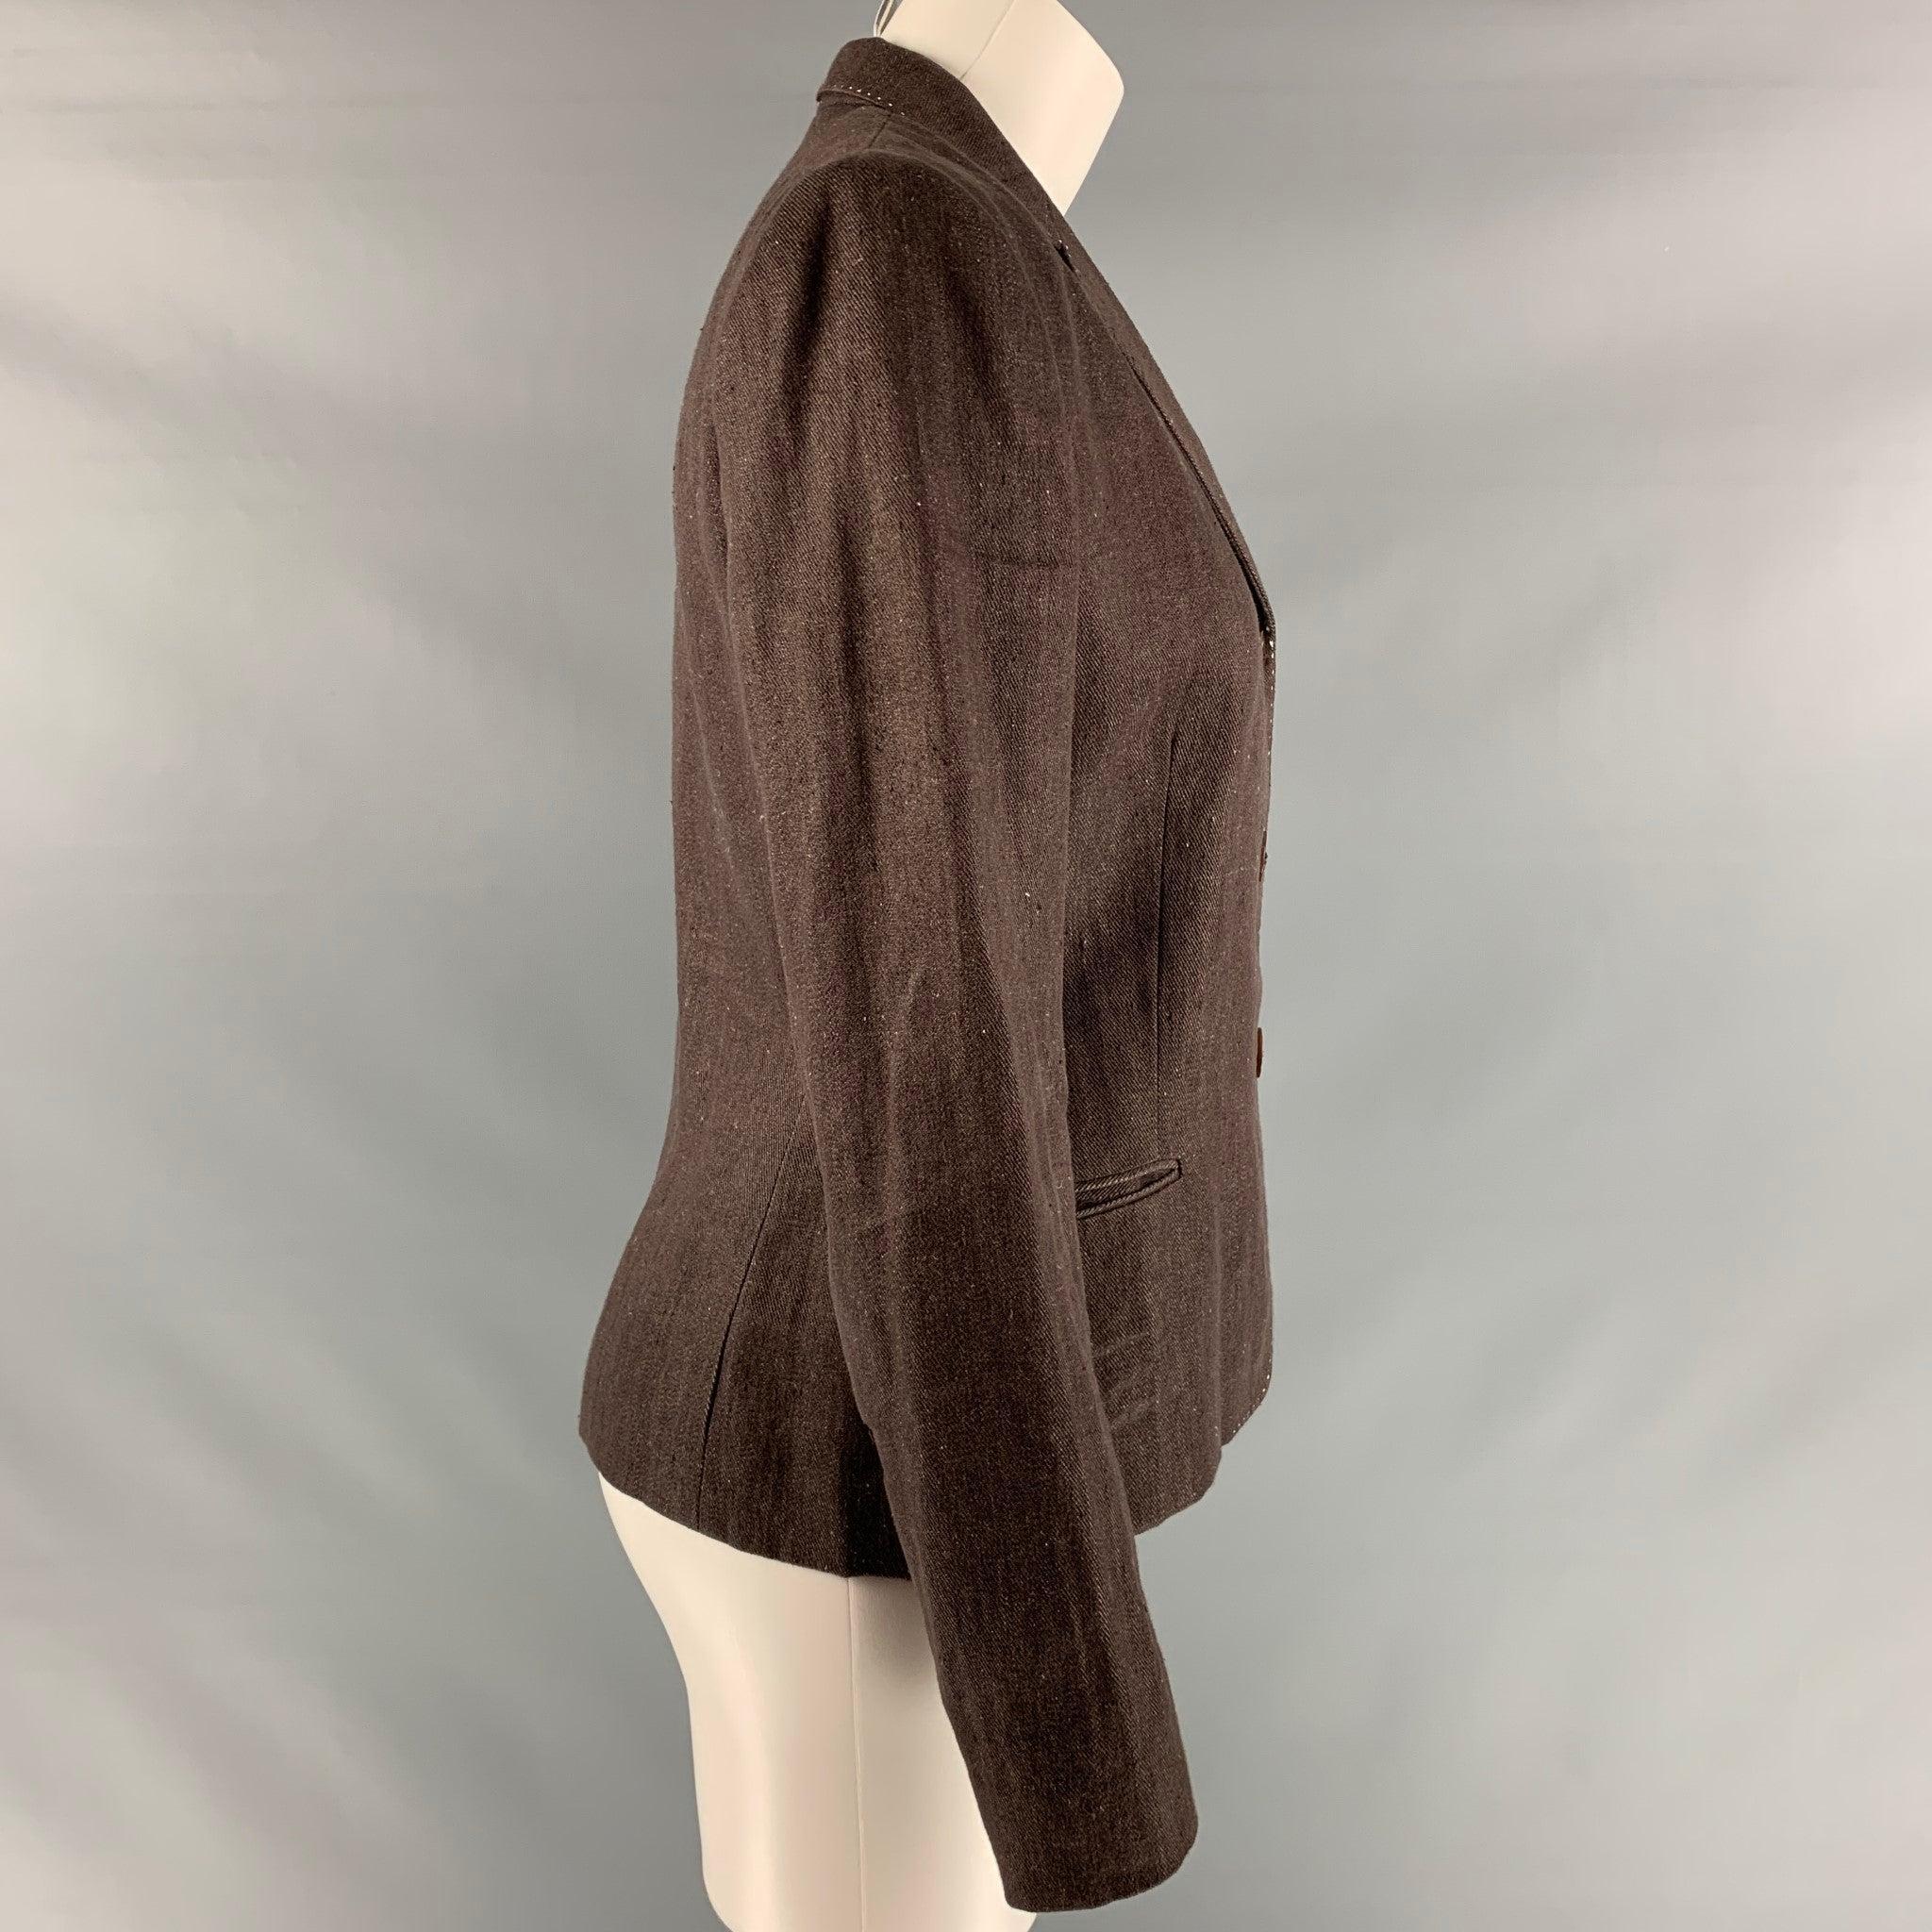 RALPH LAUREN 'COLLECTION by' blazer comes in brown linen twill fabric featuring a button down closure, two slit pockets at front and contrast top stitch details. Made in USA.Excellent Pre-Owned Condition. 

Marked:   6 

Measurements: 
 
Shoulder: